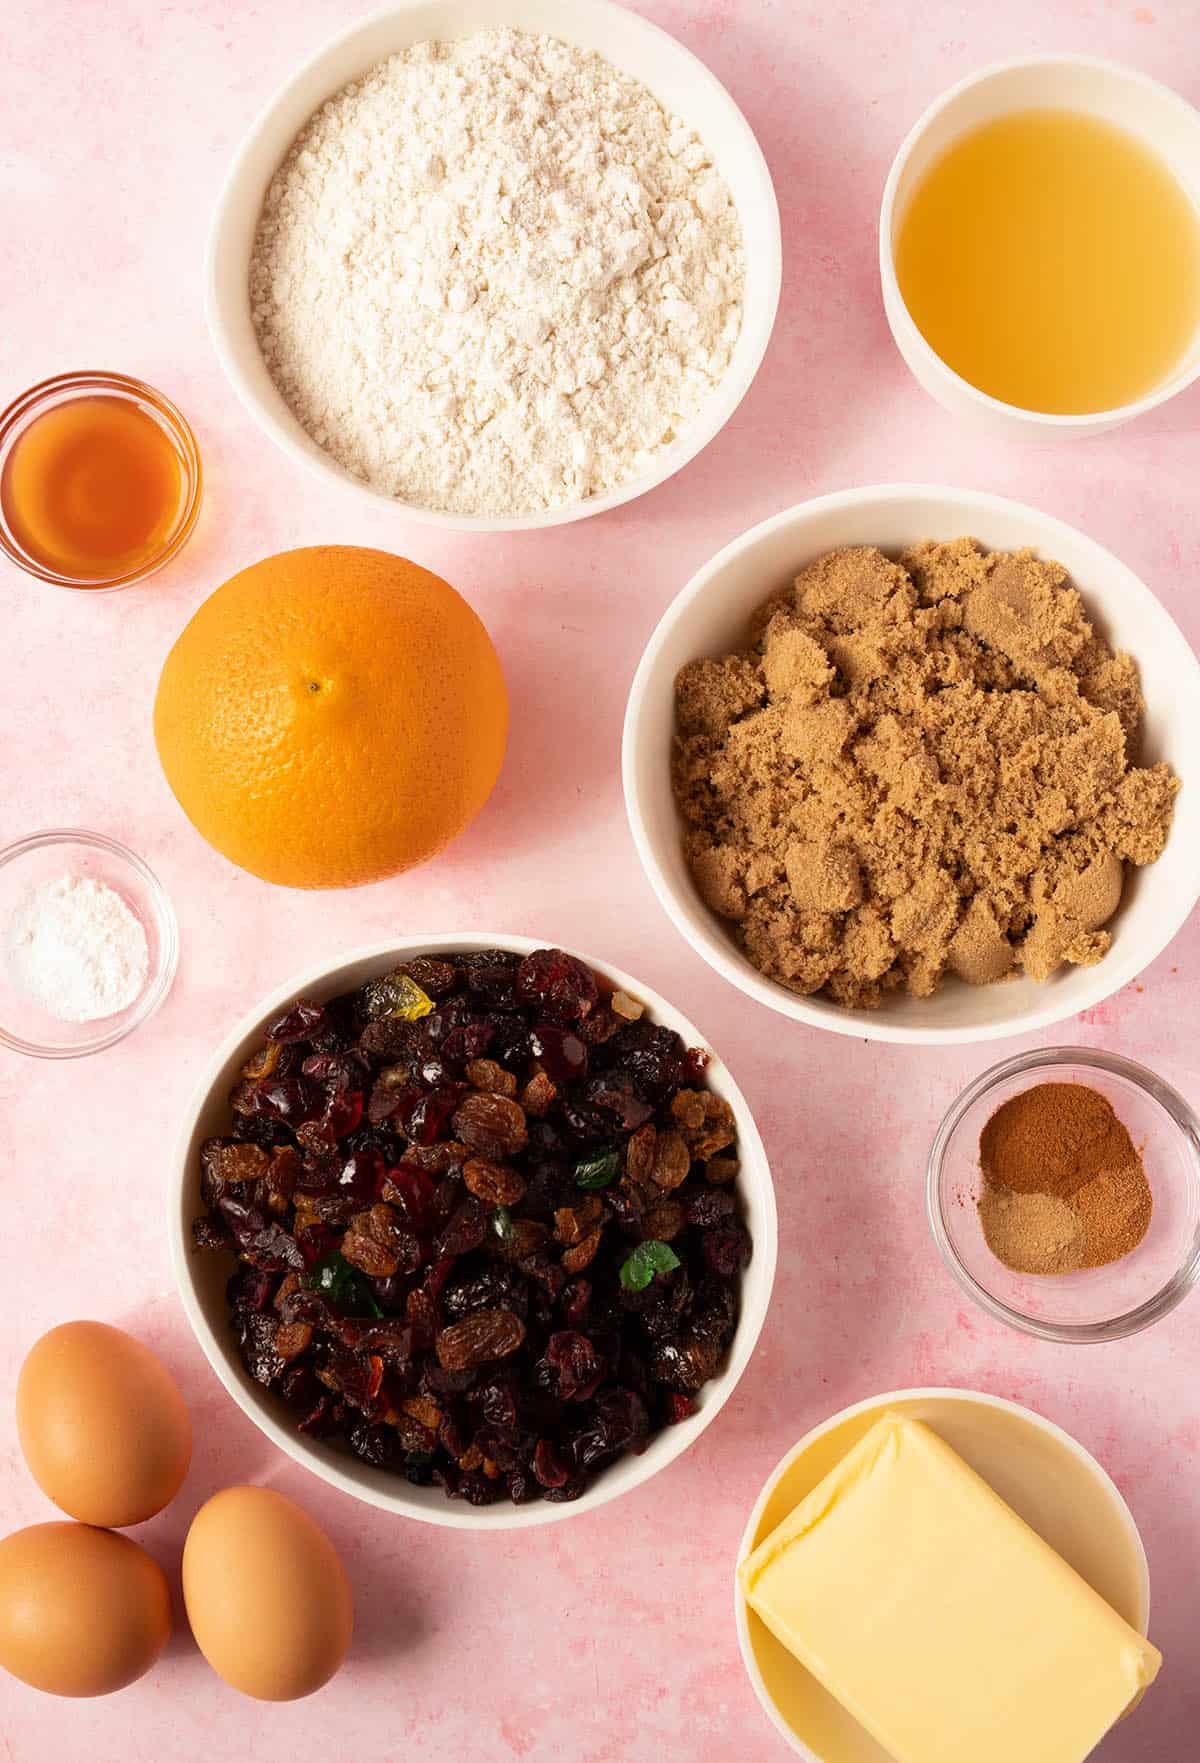 All the ingredients needed to make Fruit Cake from scratch. 